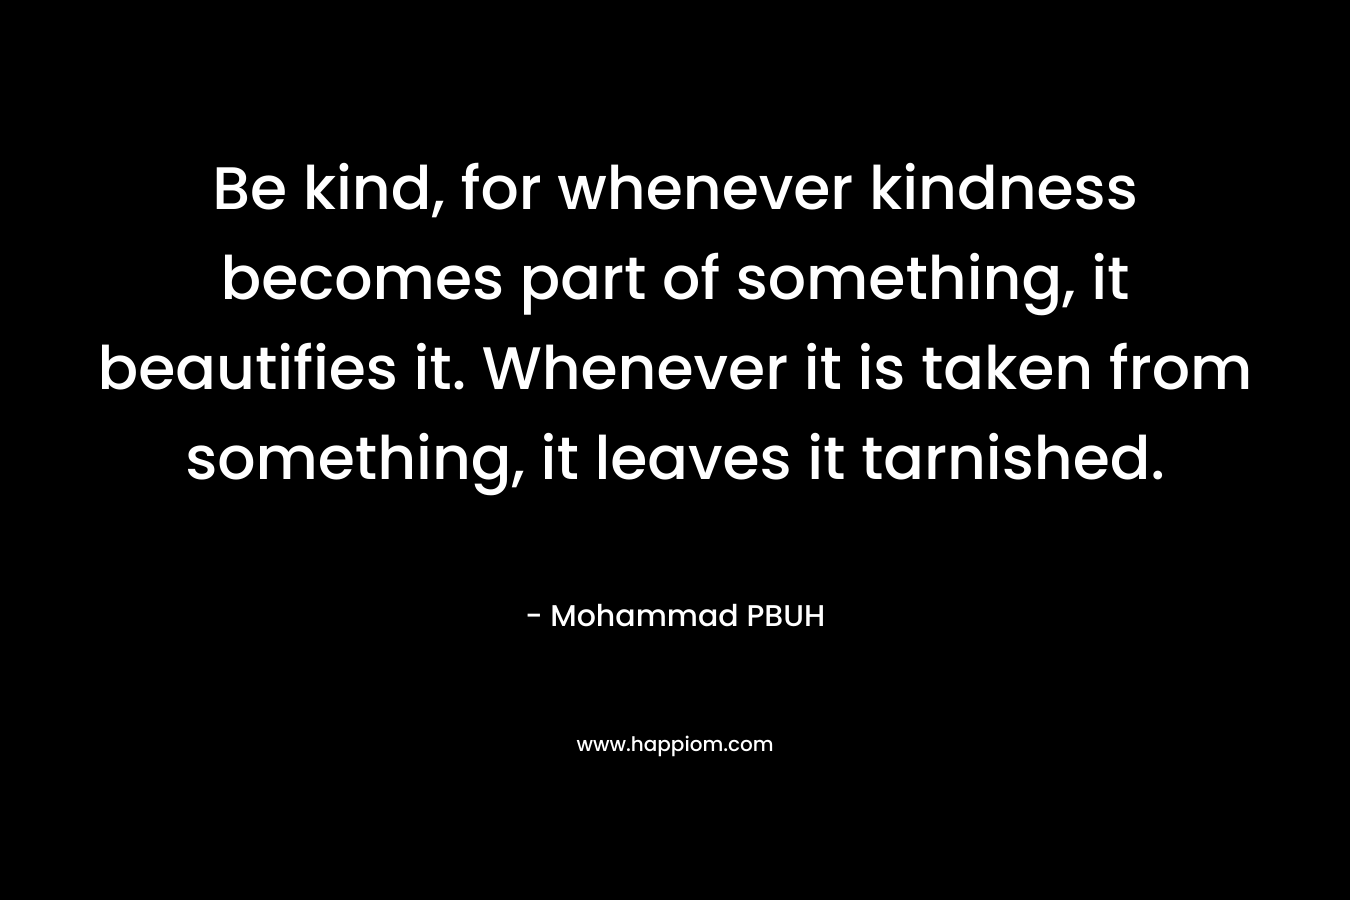 Be kind, for whenever kindness becomes part of something, it beautifies it. Whenever it is taken from something, it leaves it tarnished. – Mohammad PBUH